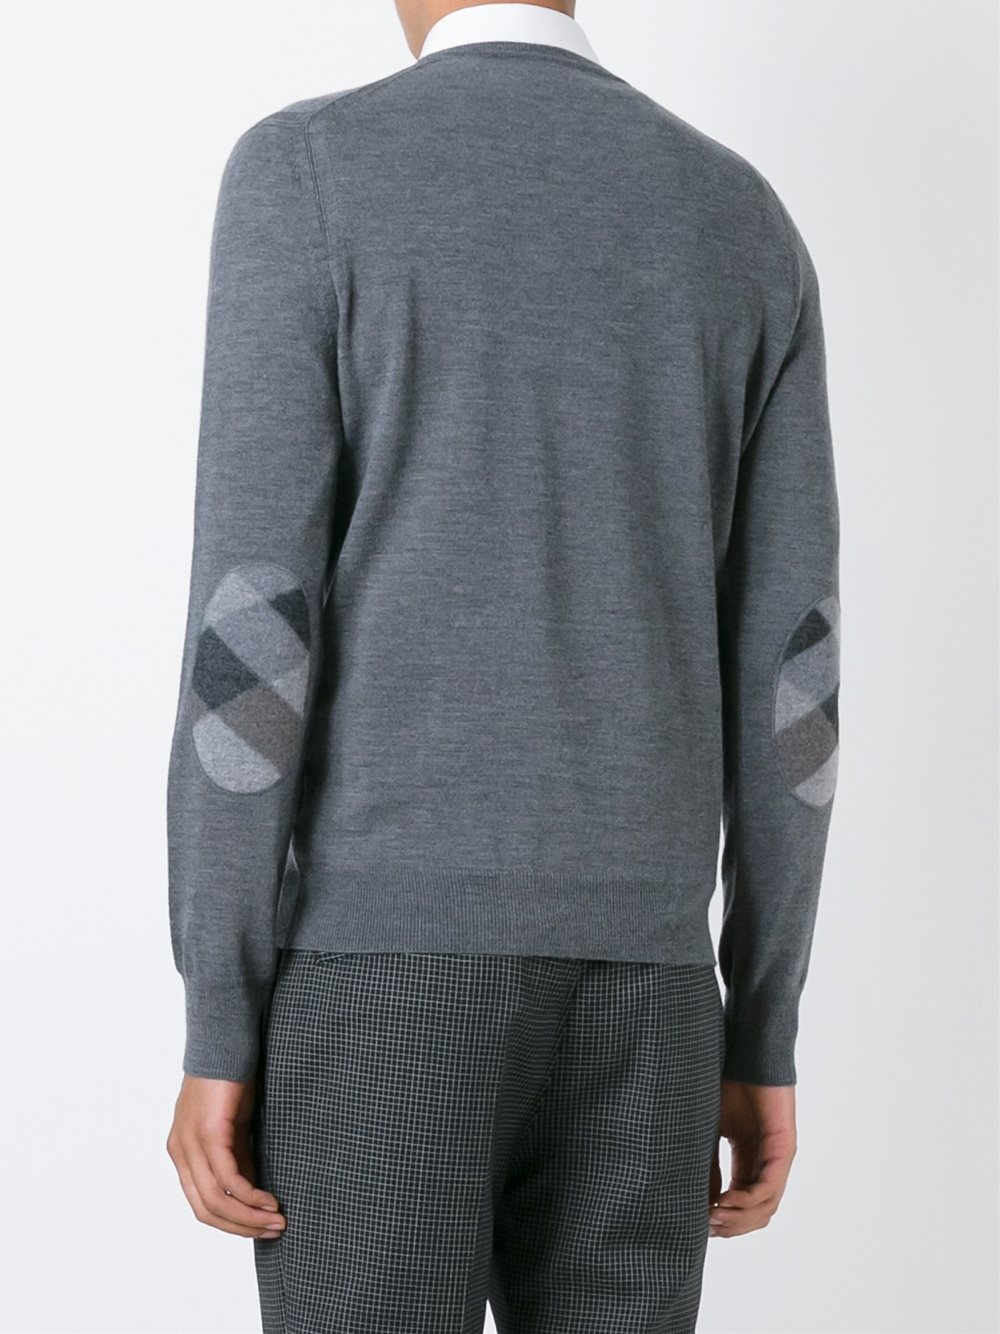 Burberry Wool Crew Neck Pullover in Grey (Gray) for Men - Lyst